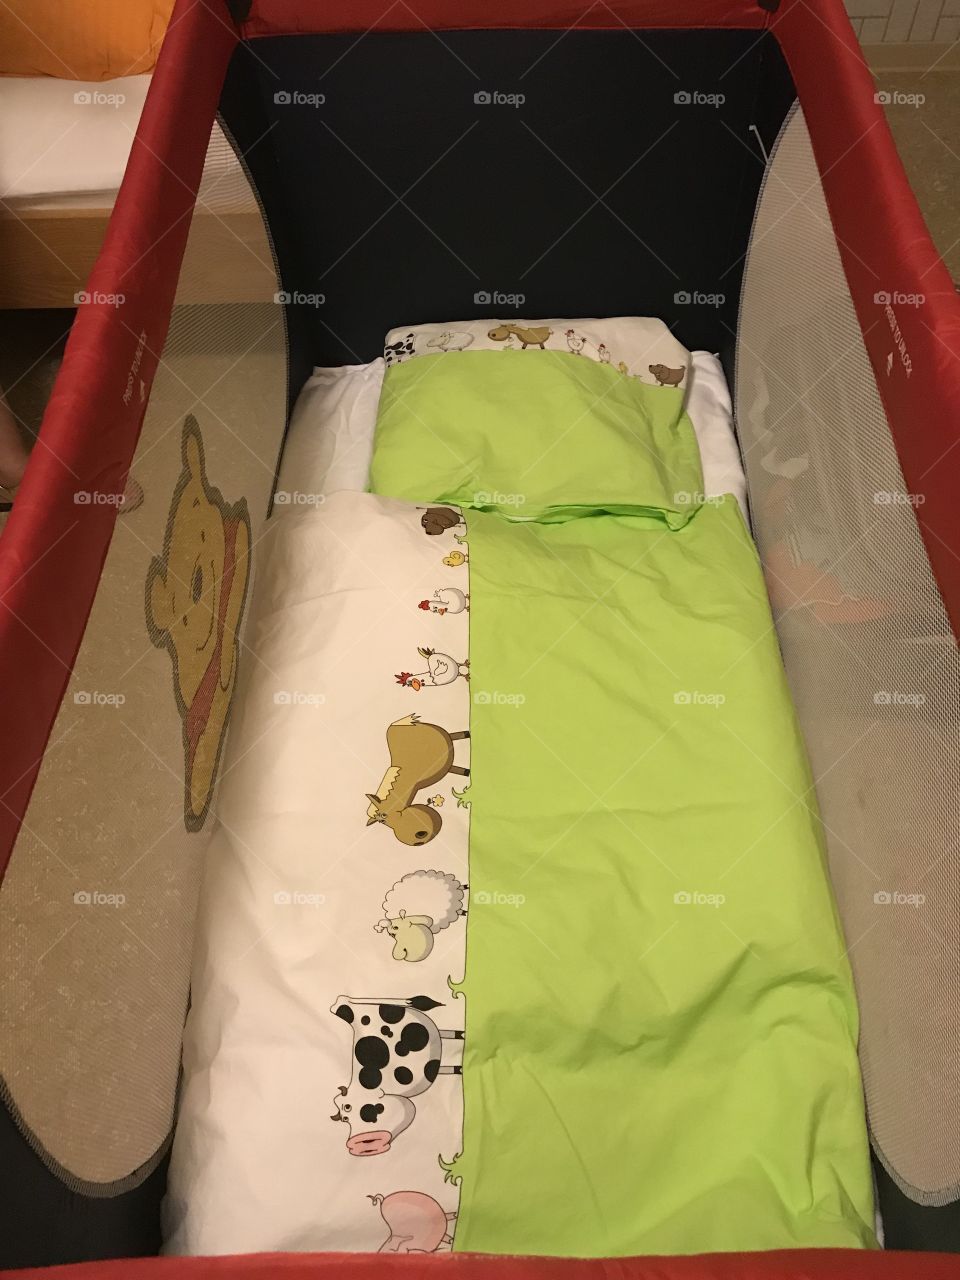 Baby’s Crib and Baby’s Bed